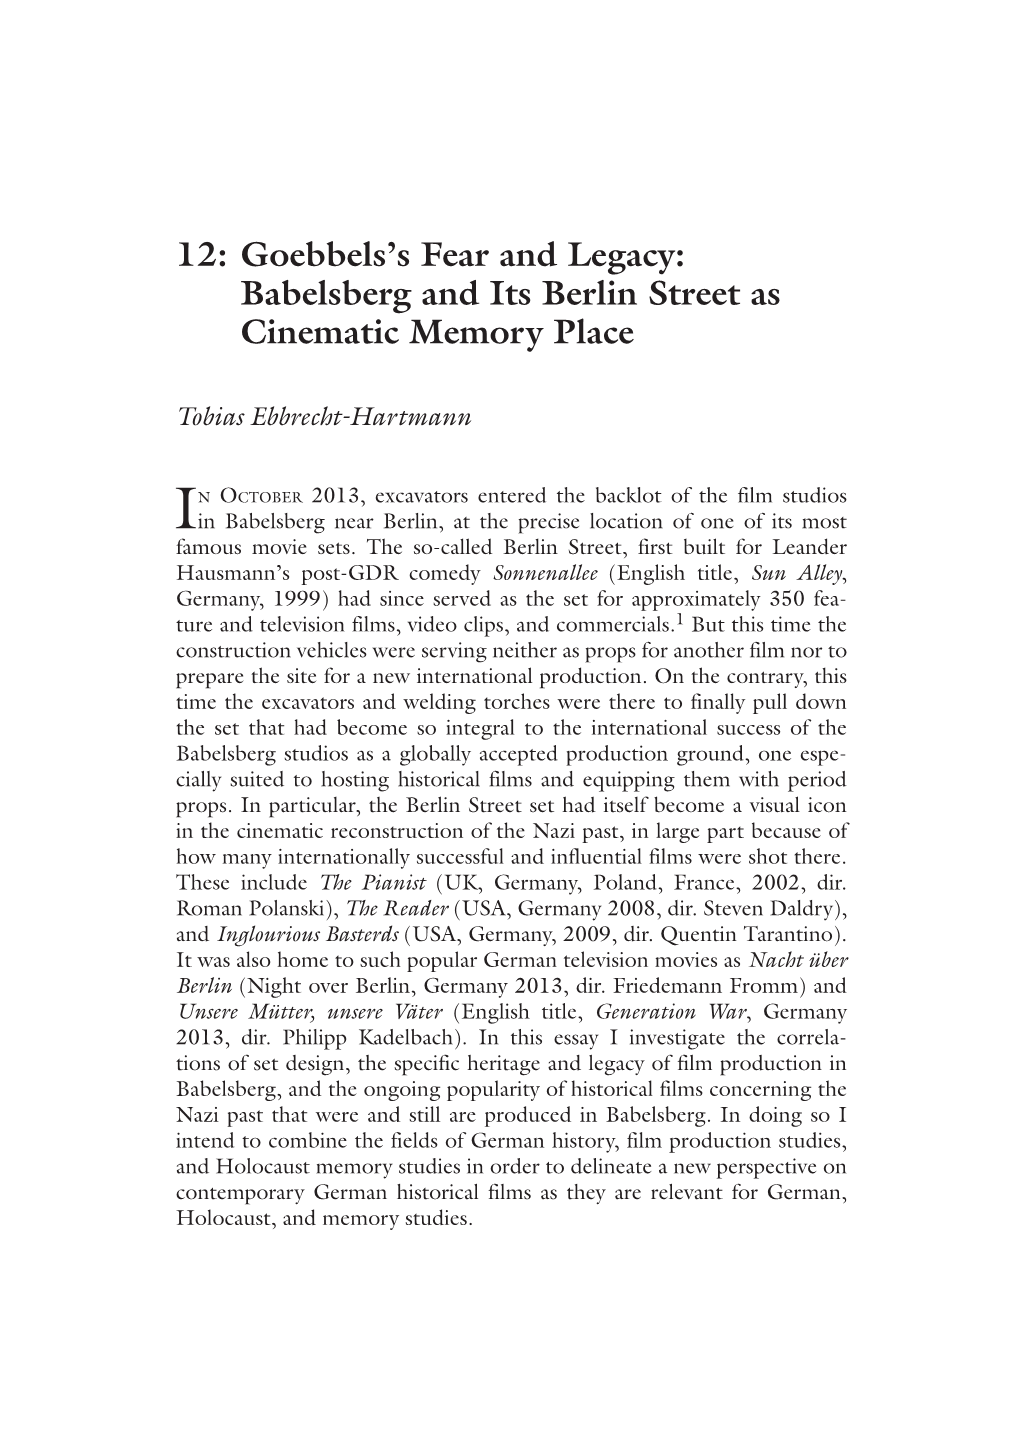 12: Goebbels's Fear and Legacy: Babelsberg and Its Berlin Street As